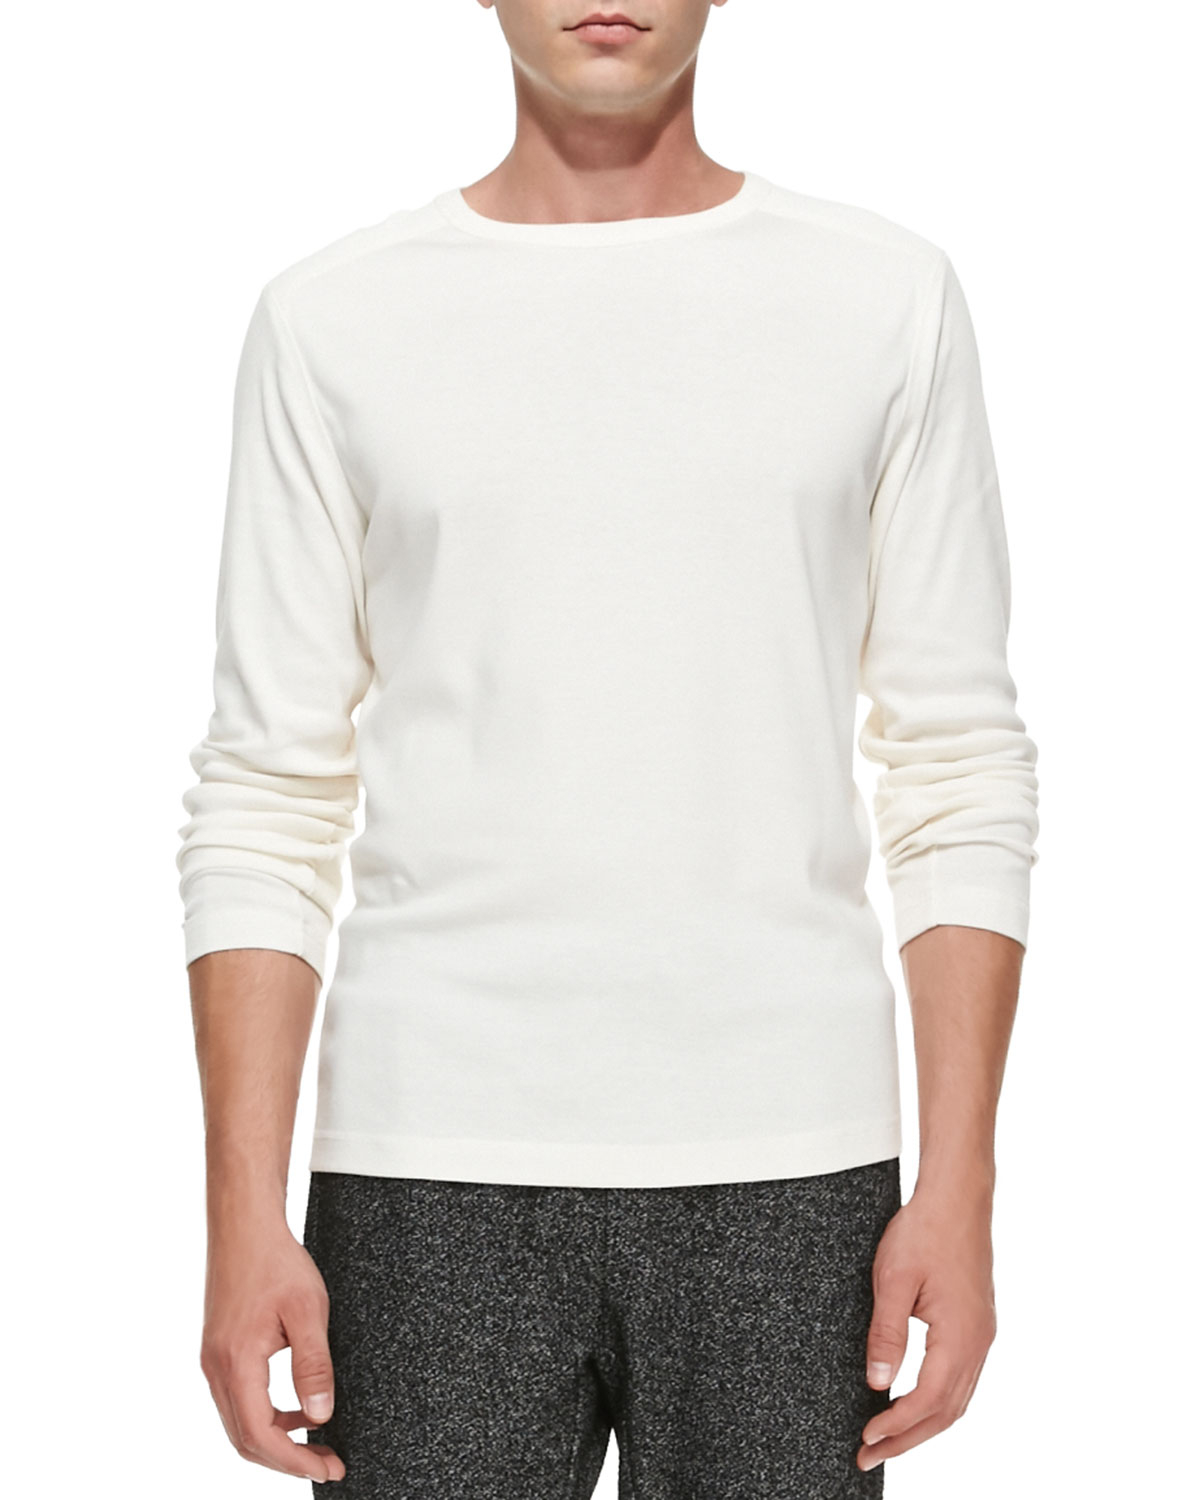 Lyst - Theory Andrion Ribbed Long-Sleeve Shirt in White for Men